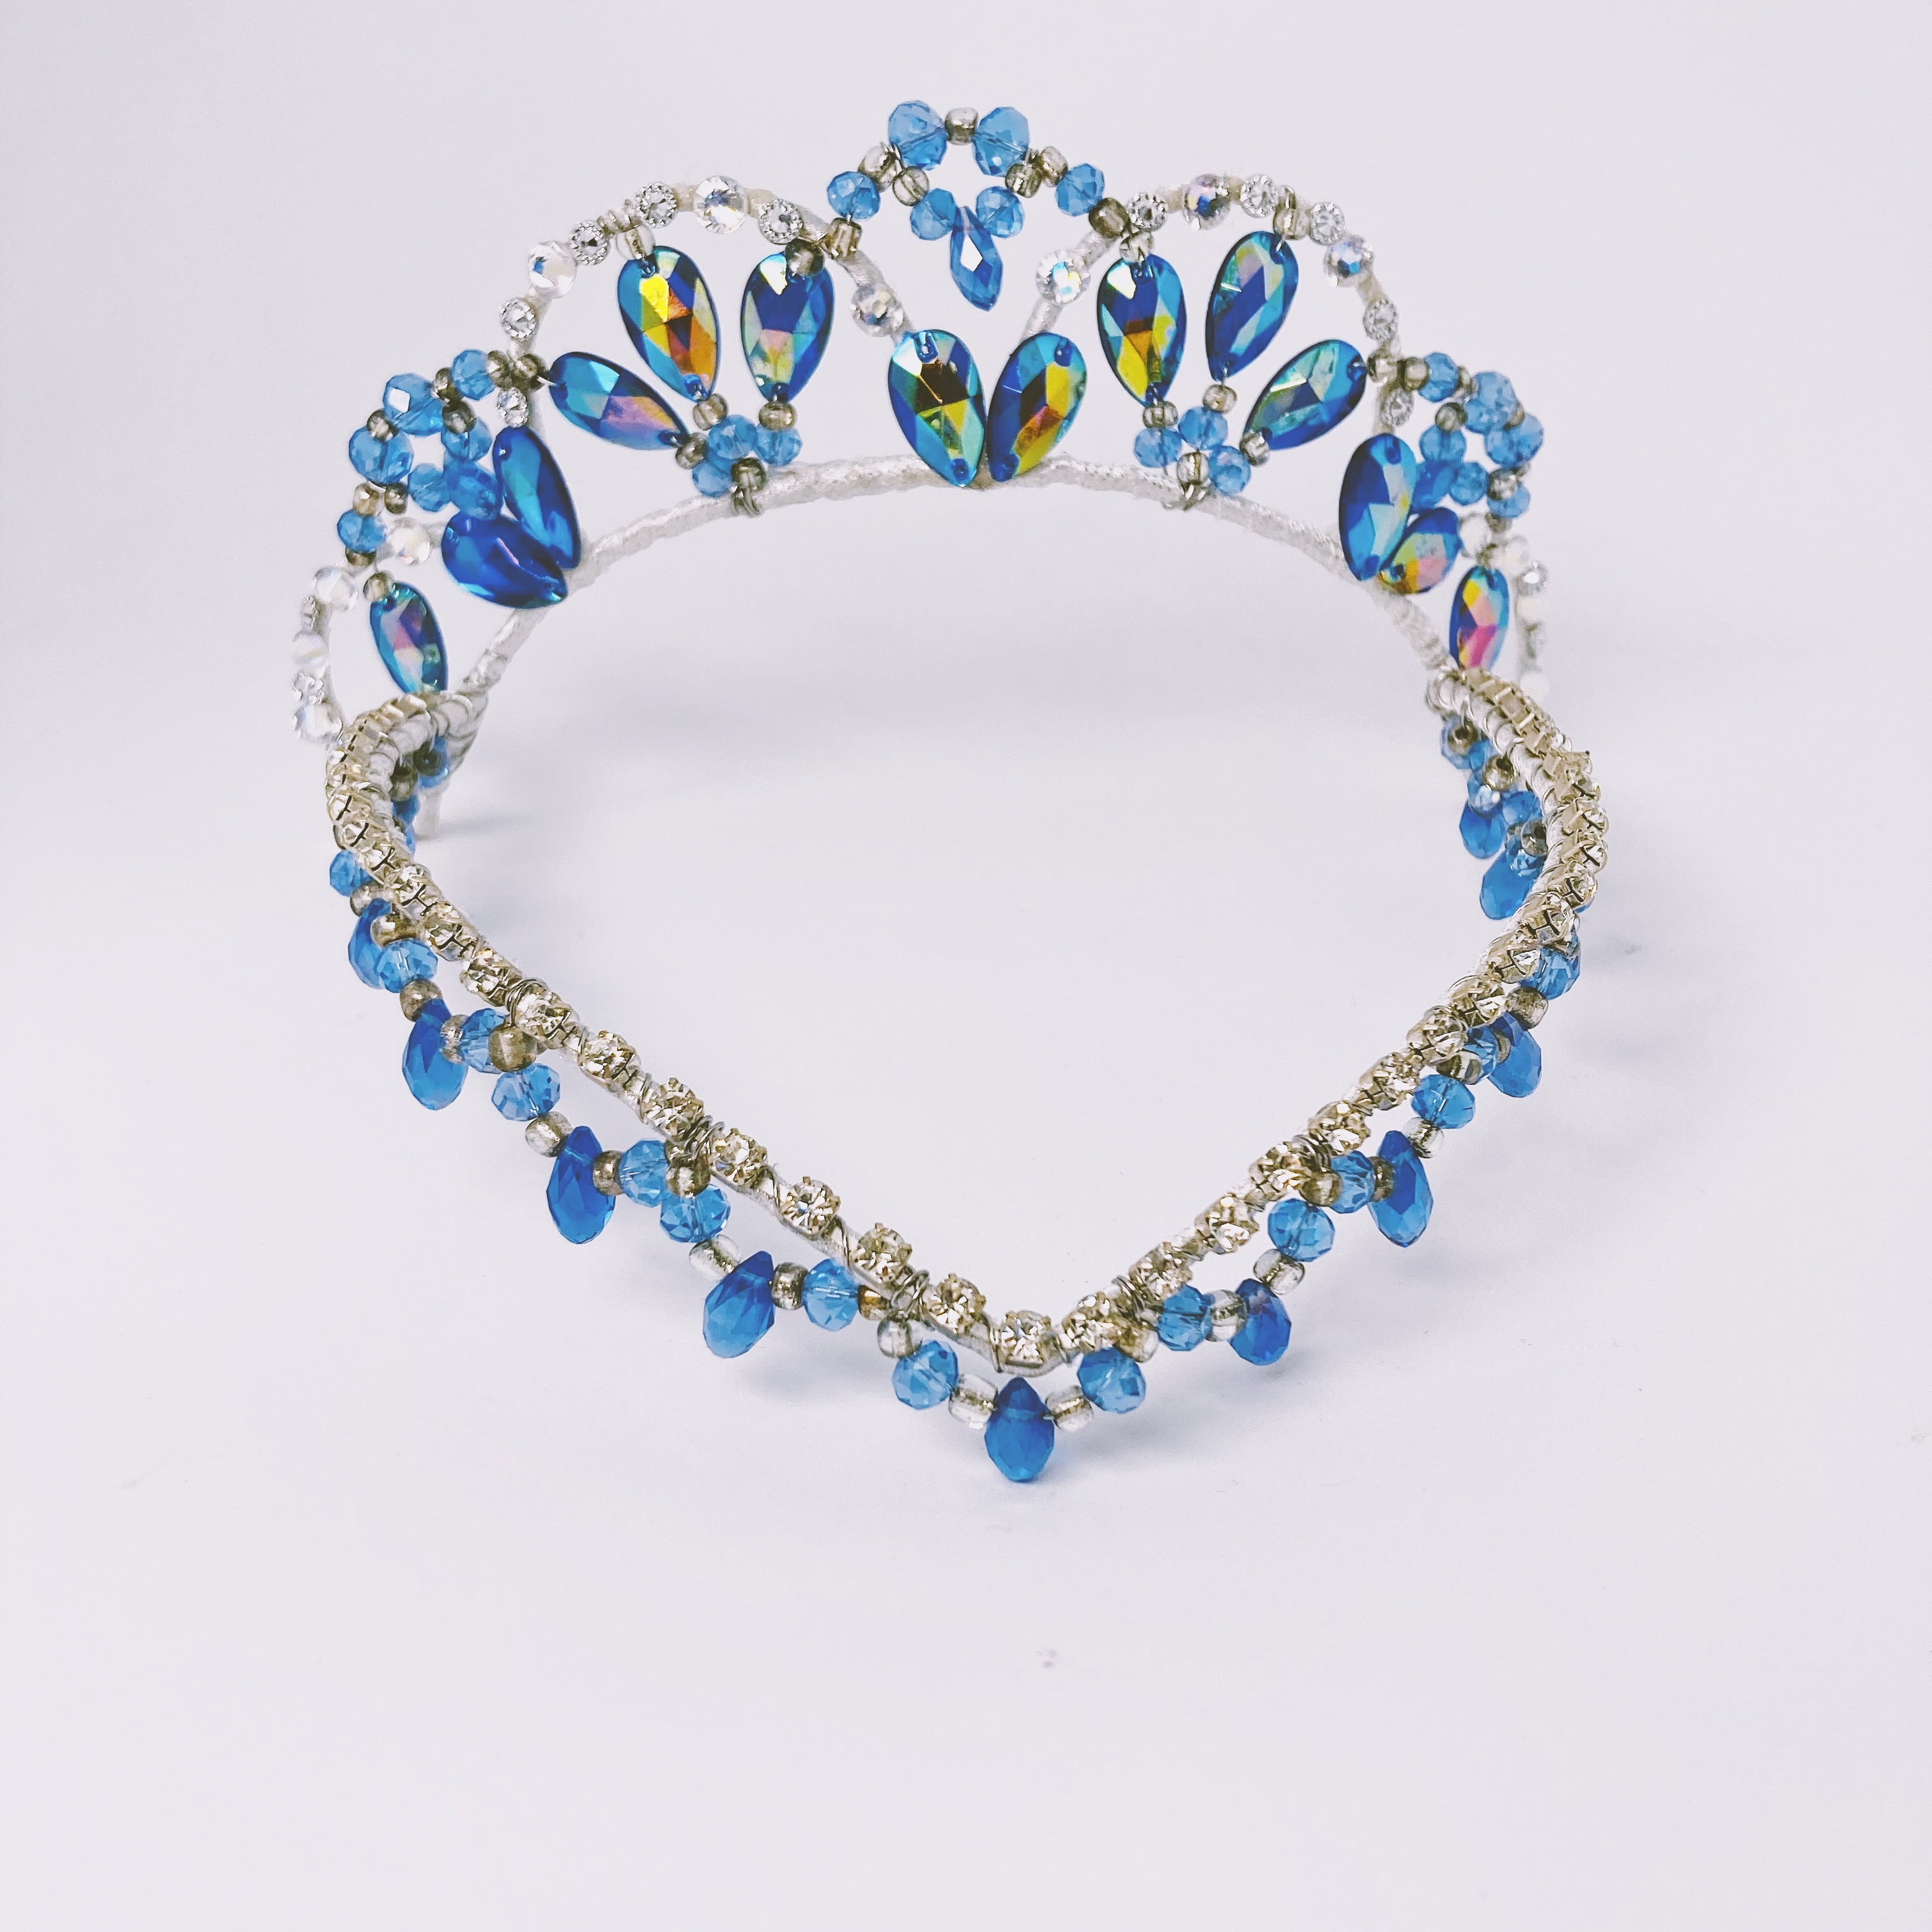 Front view of blue and silver tiara featuring blue AB crystals and a v shaped forehead piece embellished with rhinestones and fringed with blue drop beads. 